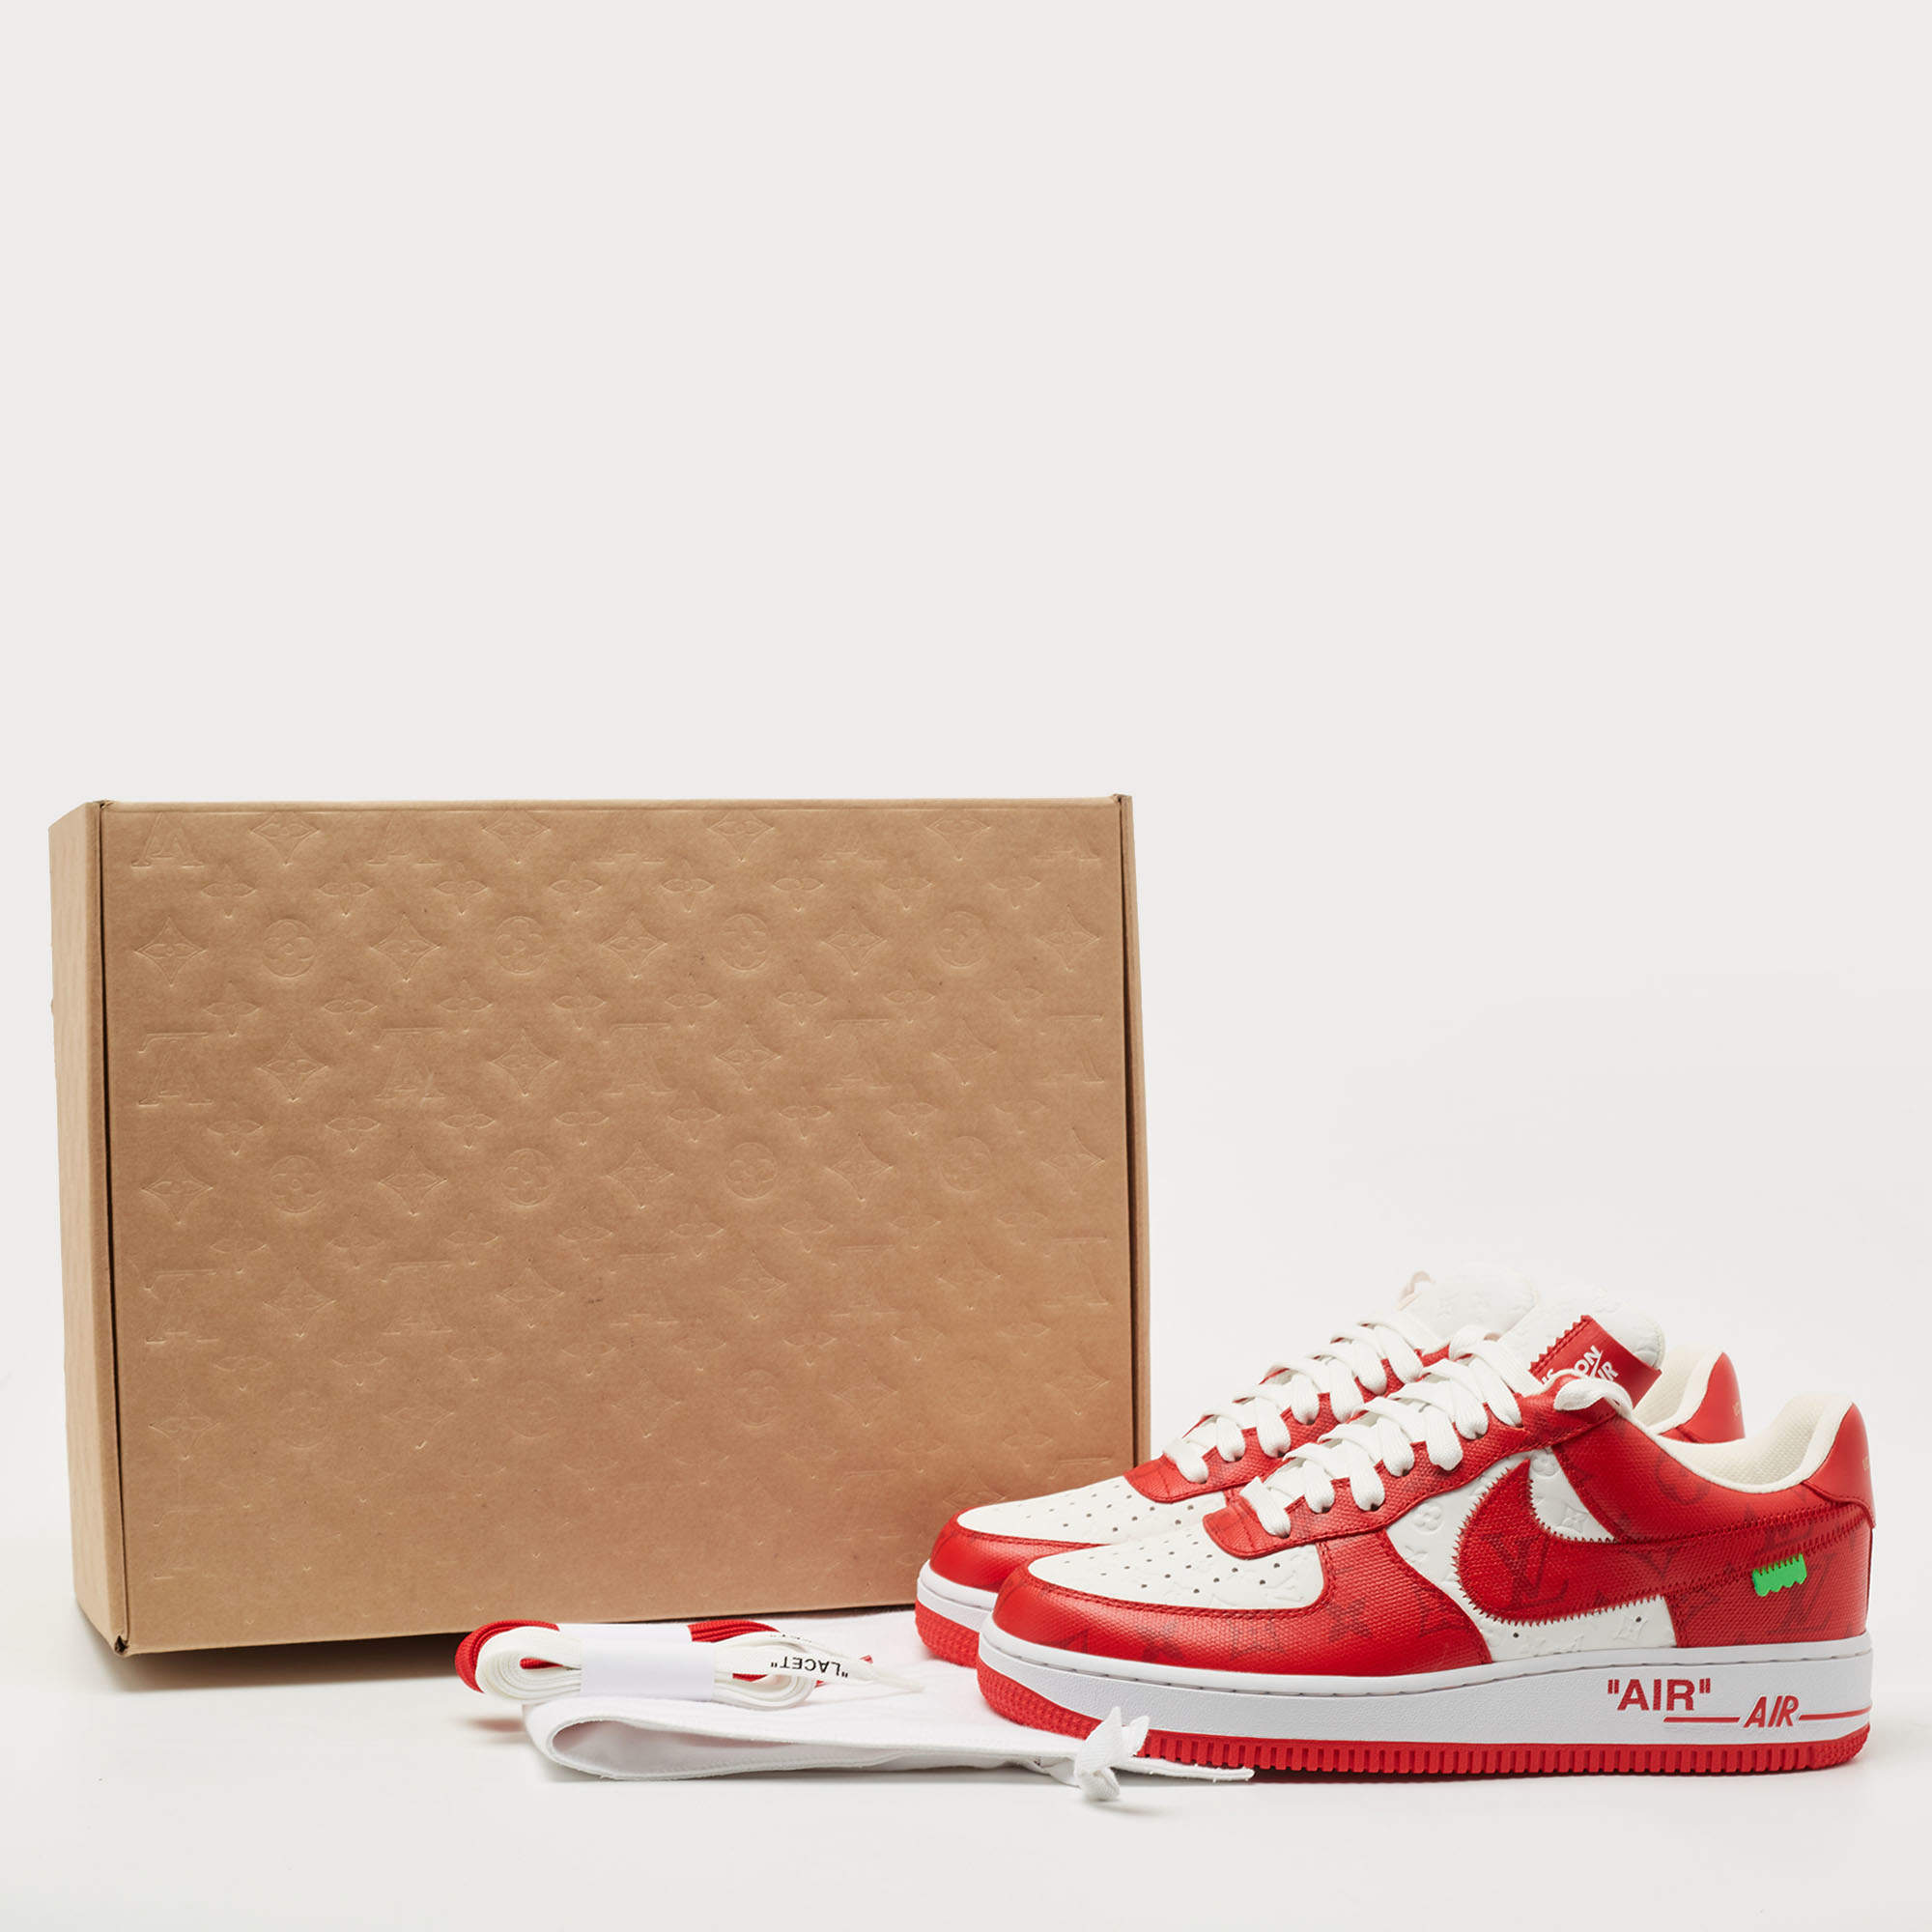 Louis Vuitton x Nike Red/White Monogram Canvas and Leather Air